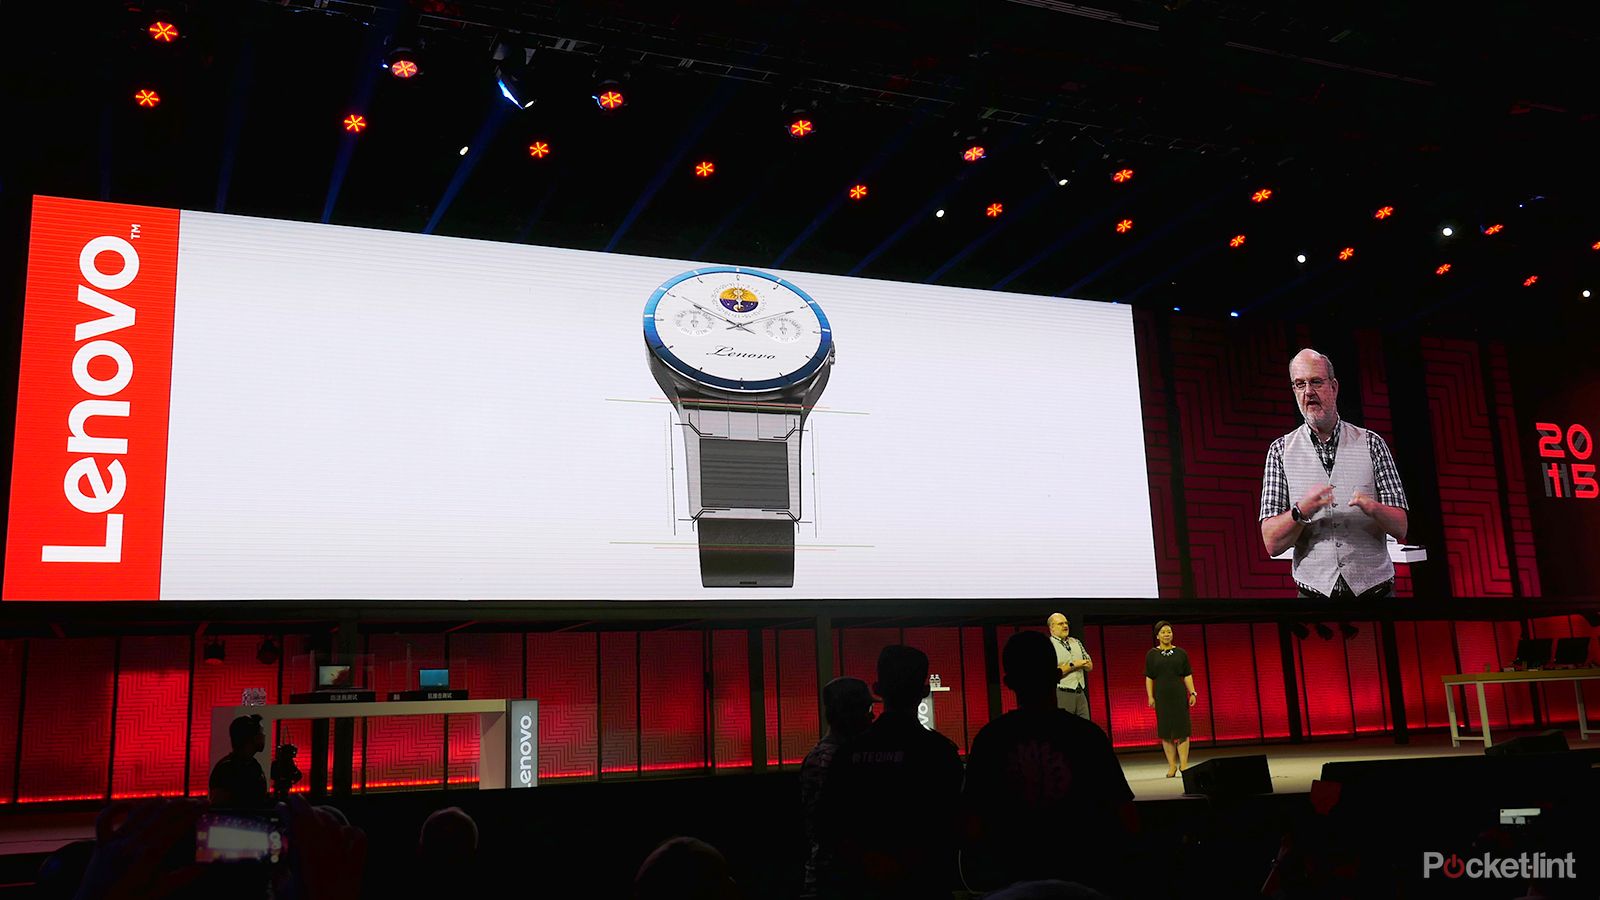 lenovo magic view dual screen smartwatch concept like bringing virtual reality to smartwatches  image 1